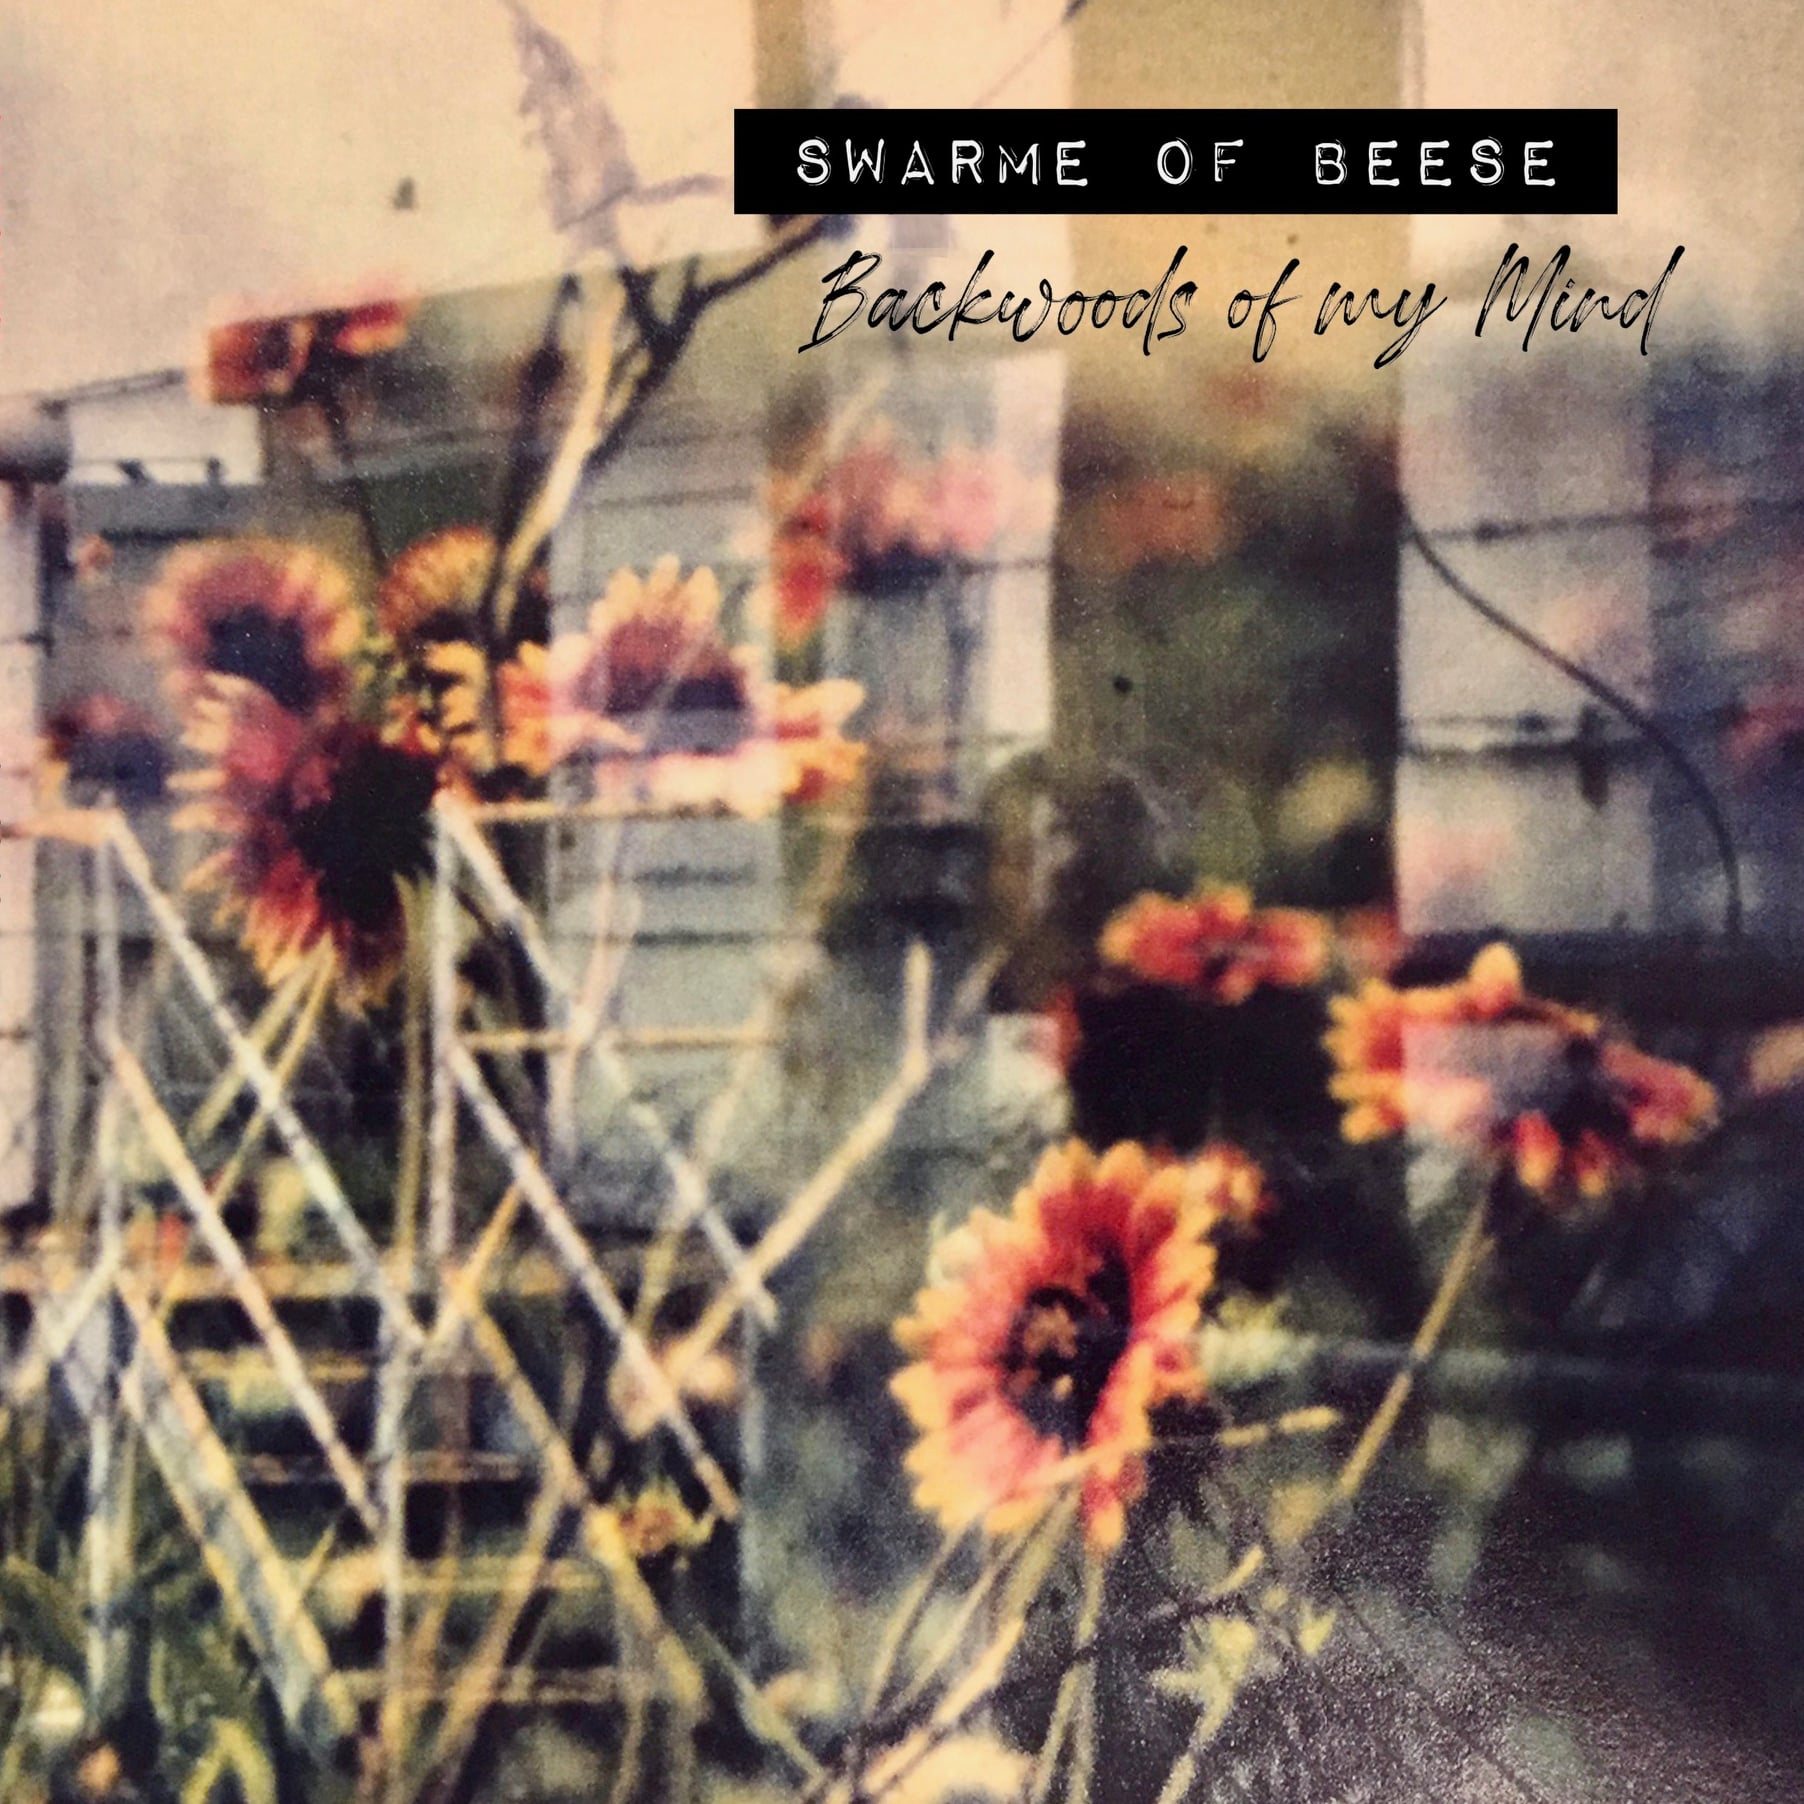 Jud Conway reviewsâ€¦ Swarme of Beese- Backwoods of My Mind